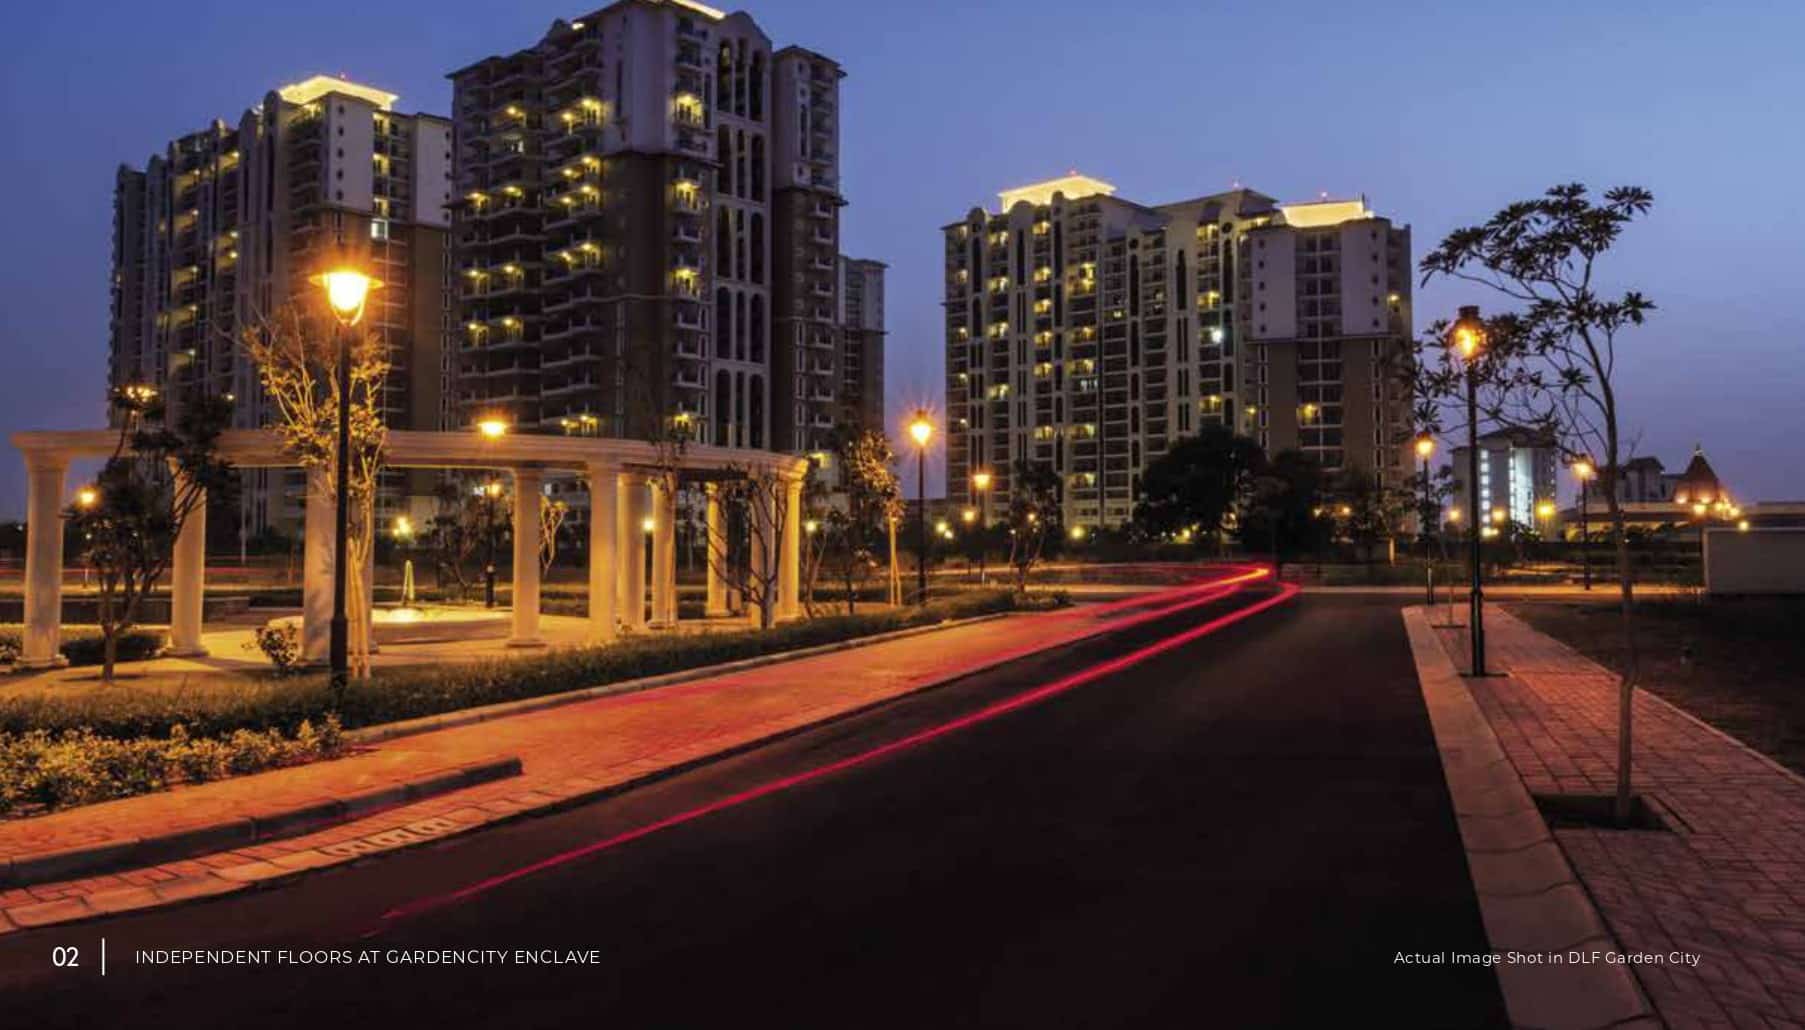 3BHK Residential Projects Sector 93, Gurgaon